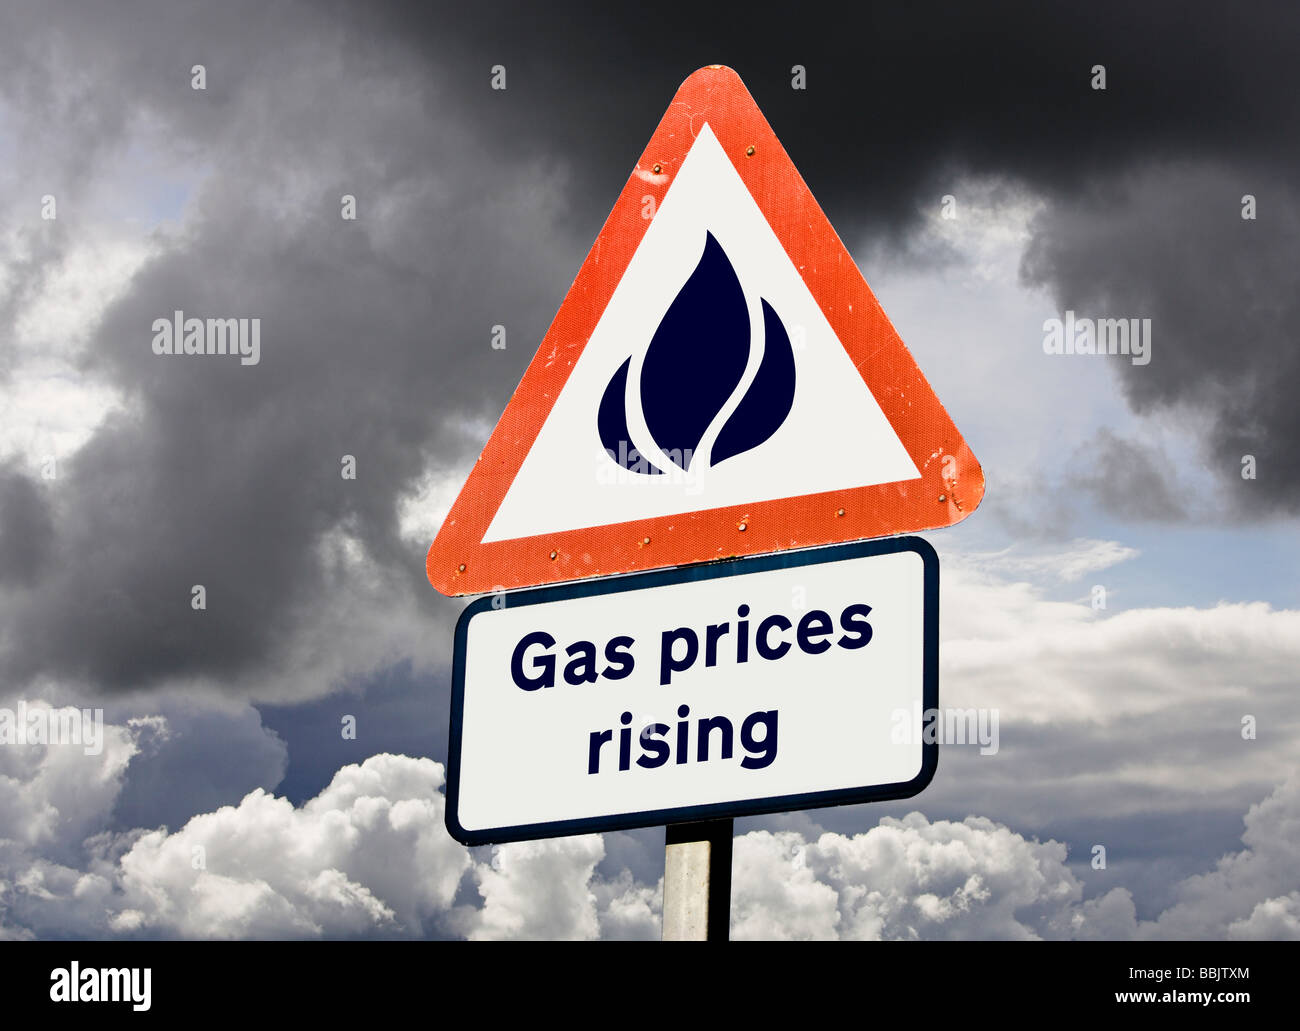 Gas energy prices, utility bills, rising - inflation or VAT concept Stock Photo